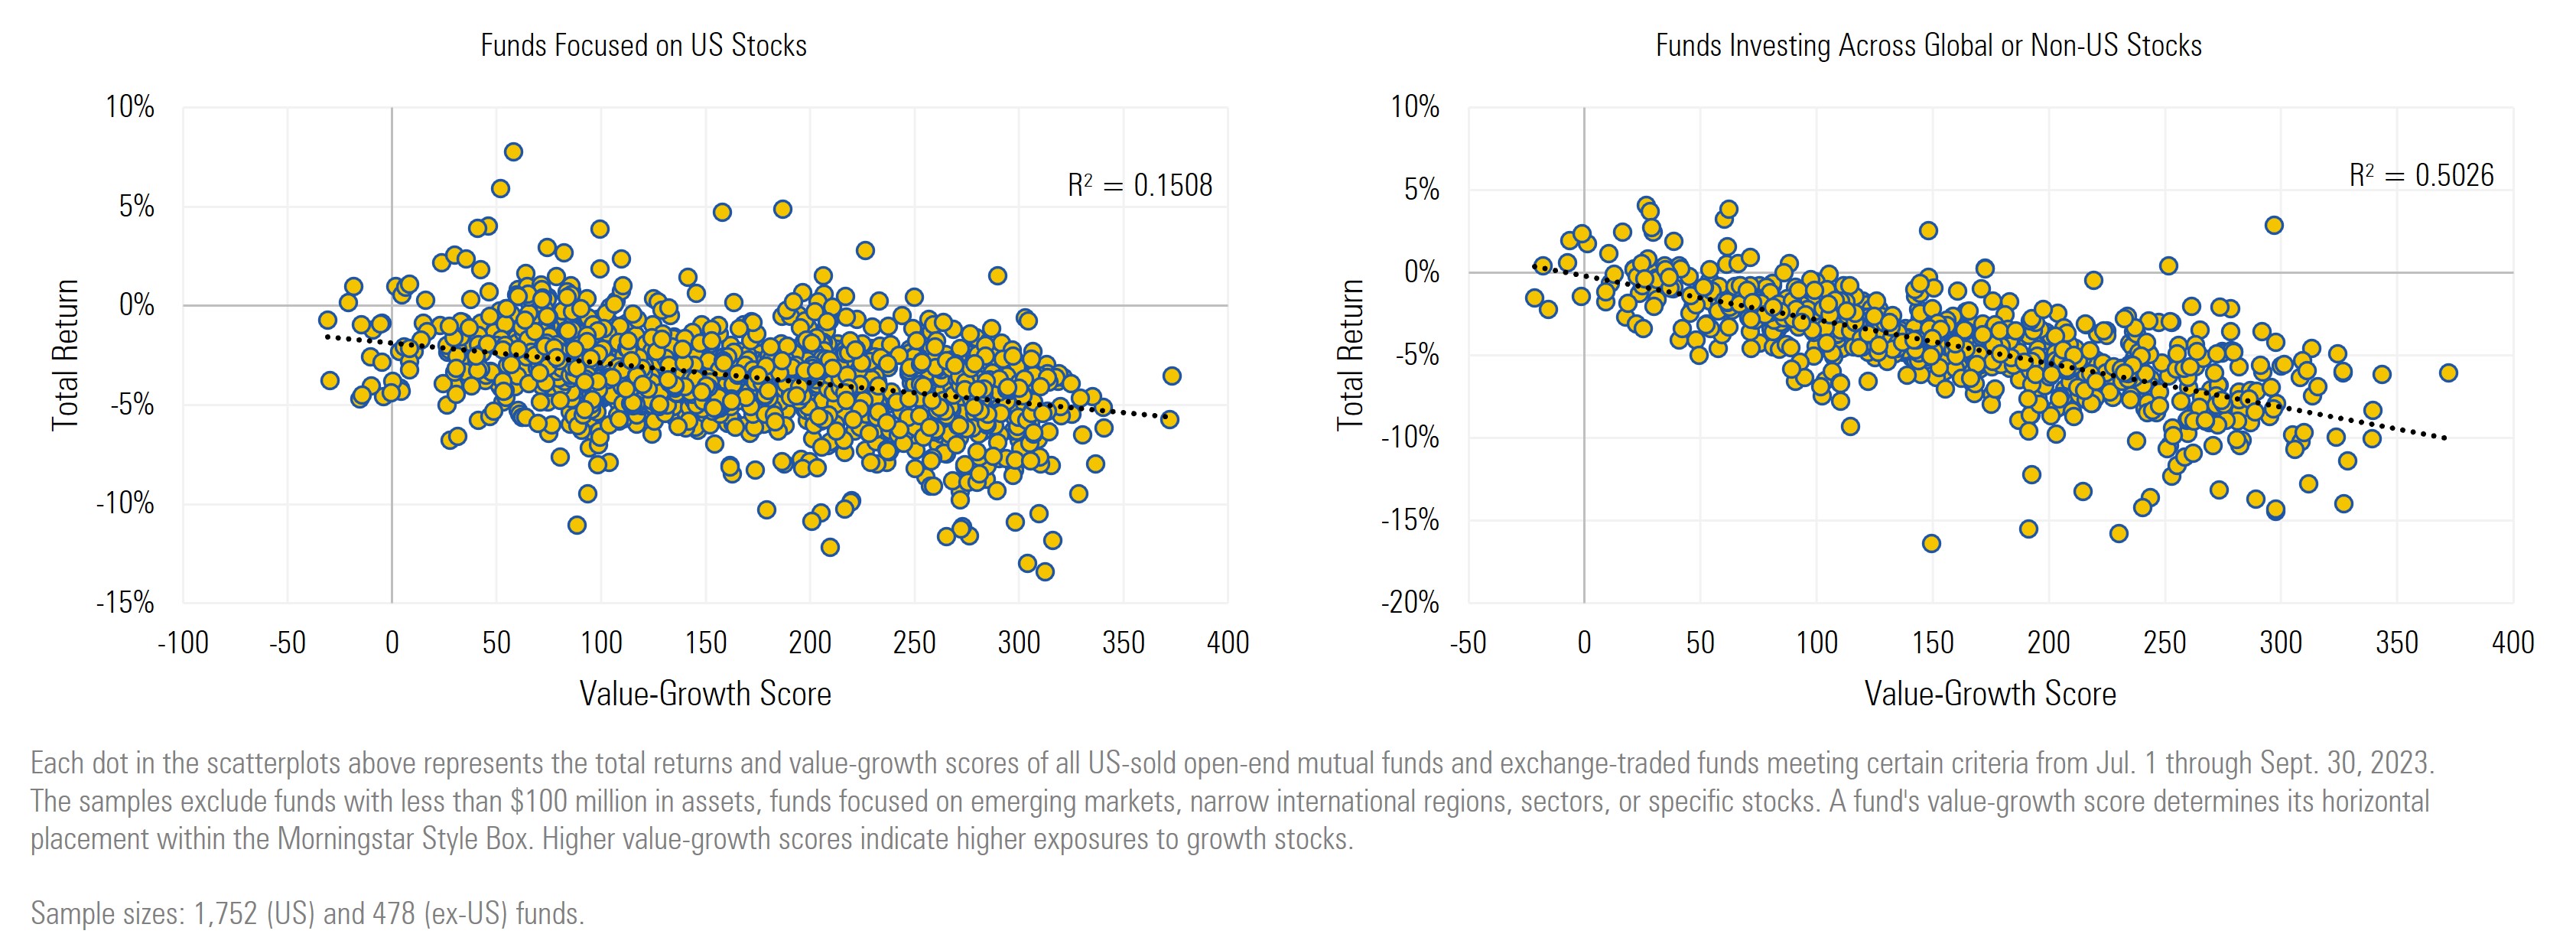 Scatterplots illustrating the total returns and value-growth scores of all US-sold open-end mutual funds and exchange-traded funds meeting certain criteria from Jul. 1 through Sept. 30, 2023.
The samples exclude funds with less than $100 million in assets, funds focused on emerging markets, narrow international regions, sectors, or specific stocks. A fund's value-growth score determines its horizontal placement within the Morningstar Style Box. Higher value-growth scores indicate higher exposures to growth stocks.